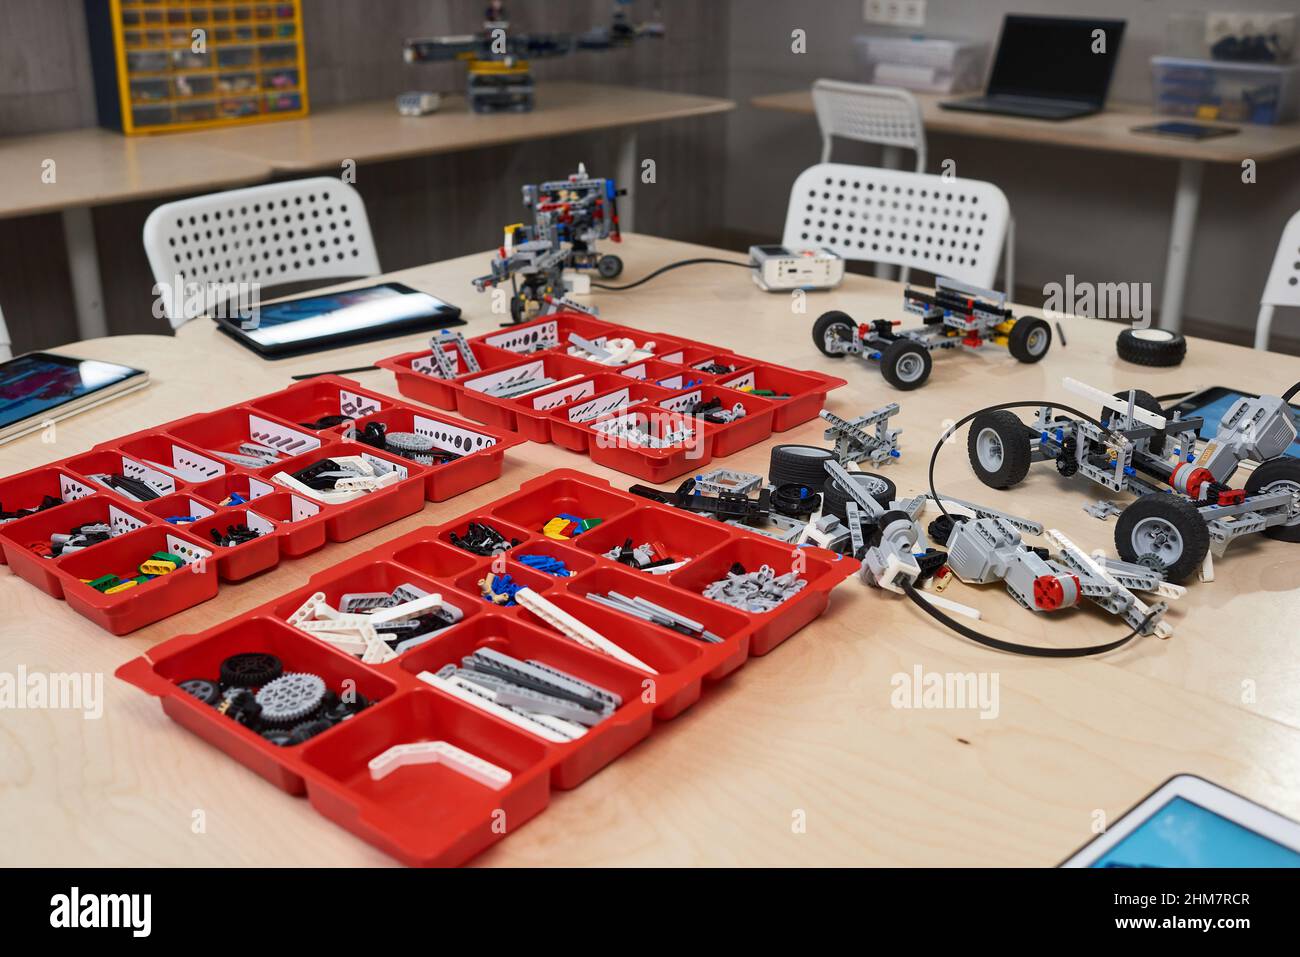 Background image of robot construction set parts in containers on table in robotics and engineer class at modern school, copy space Stock Photo